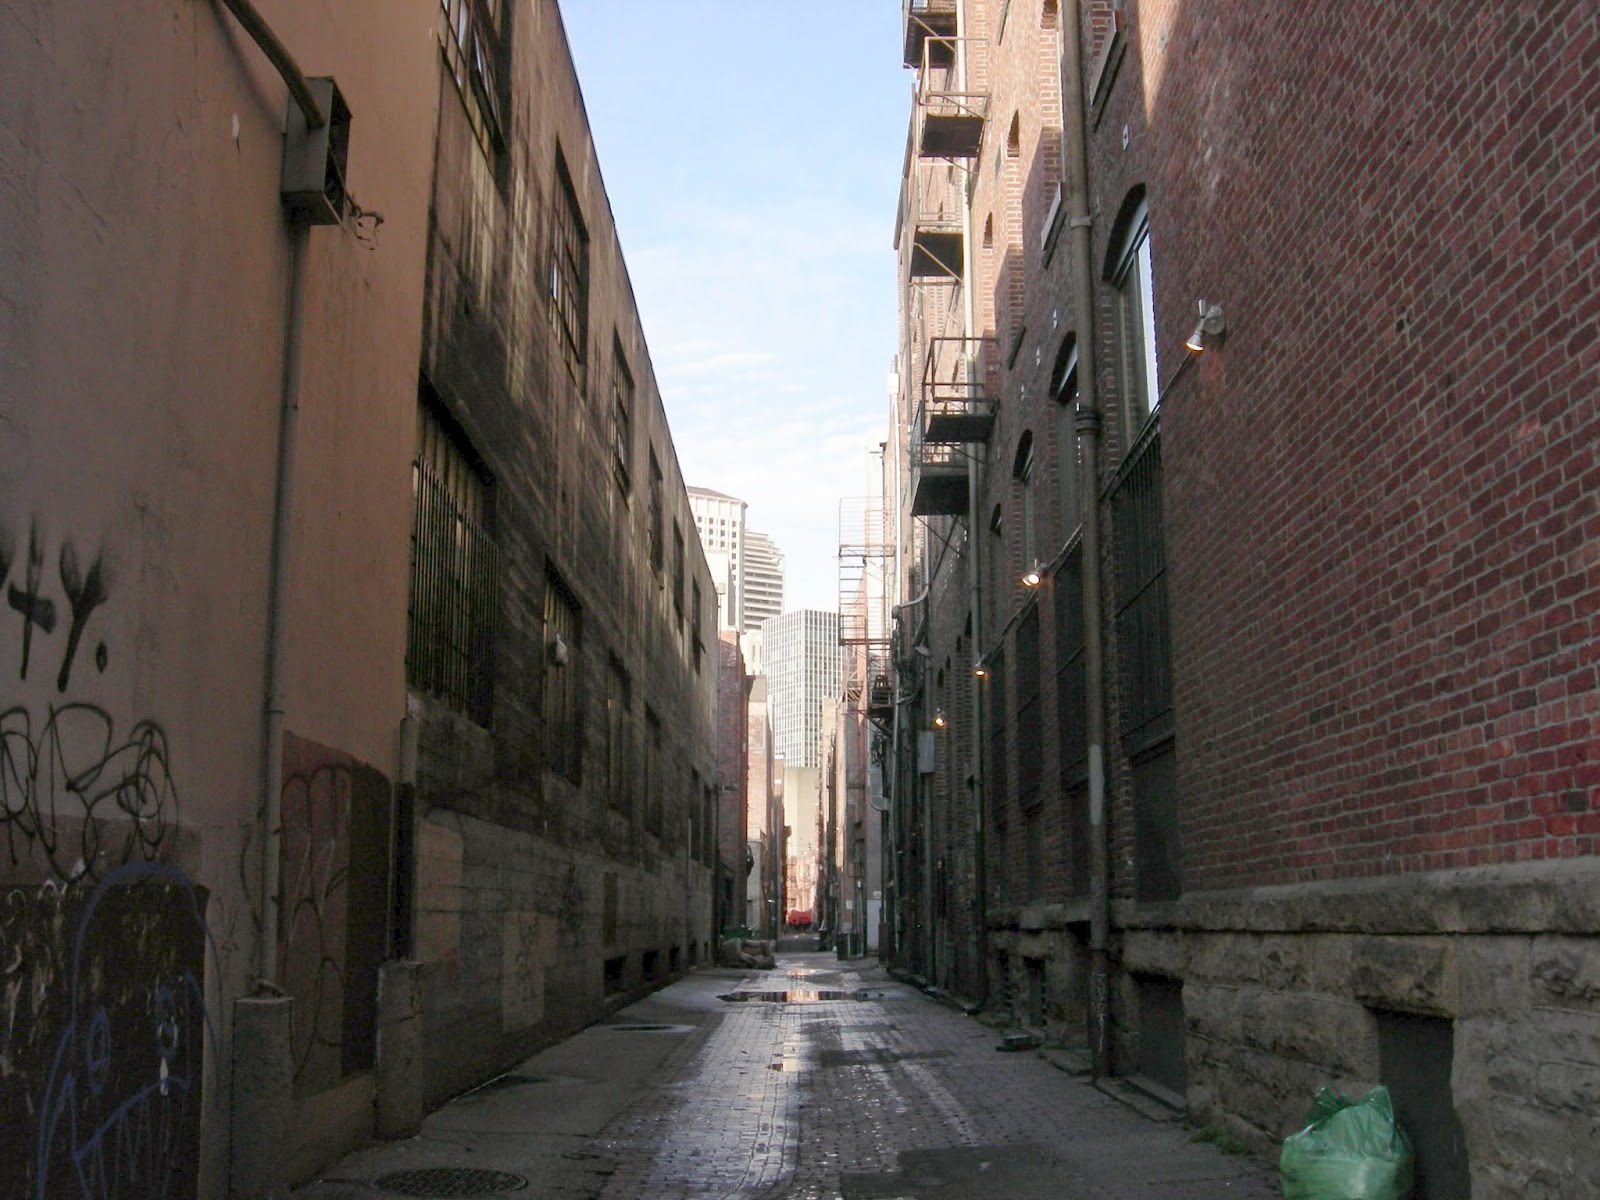 The alley